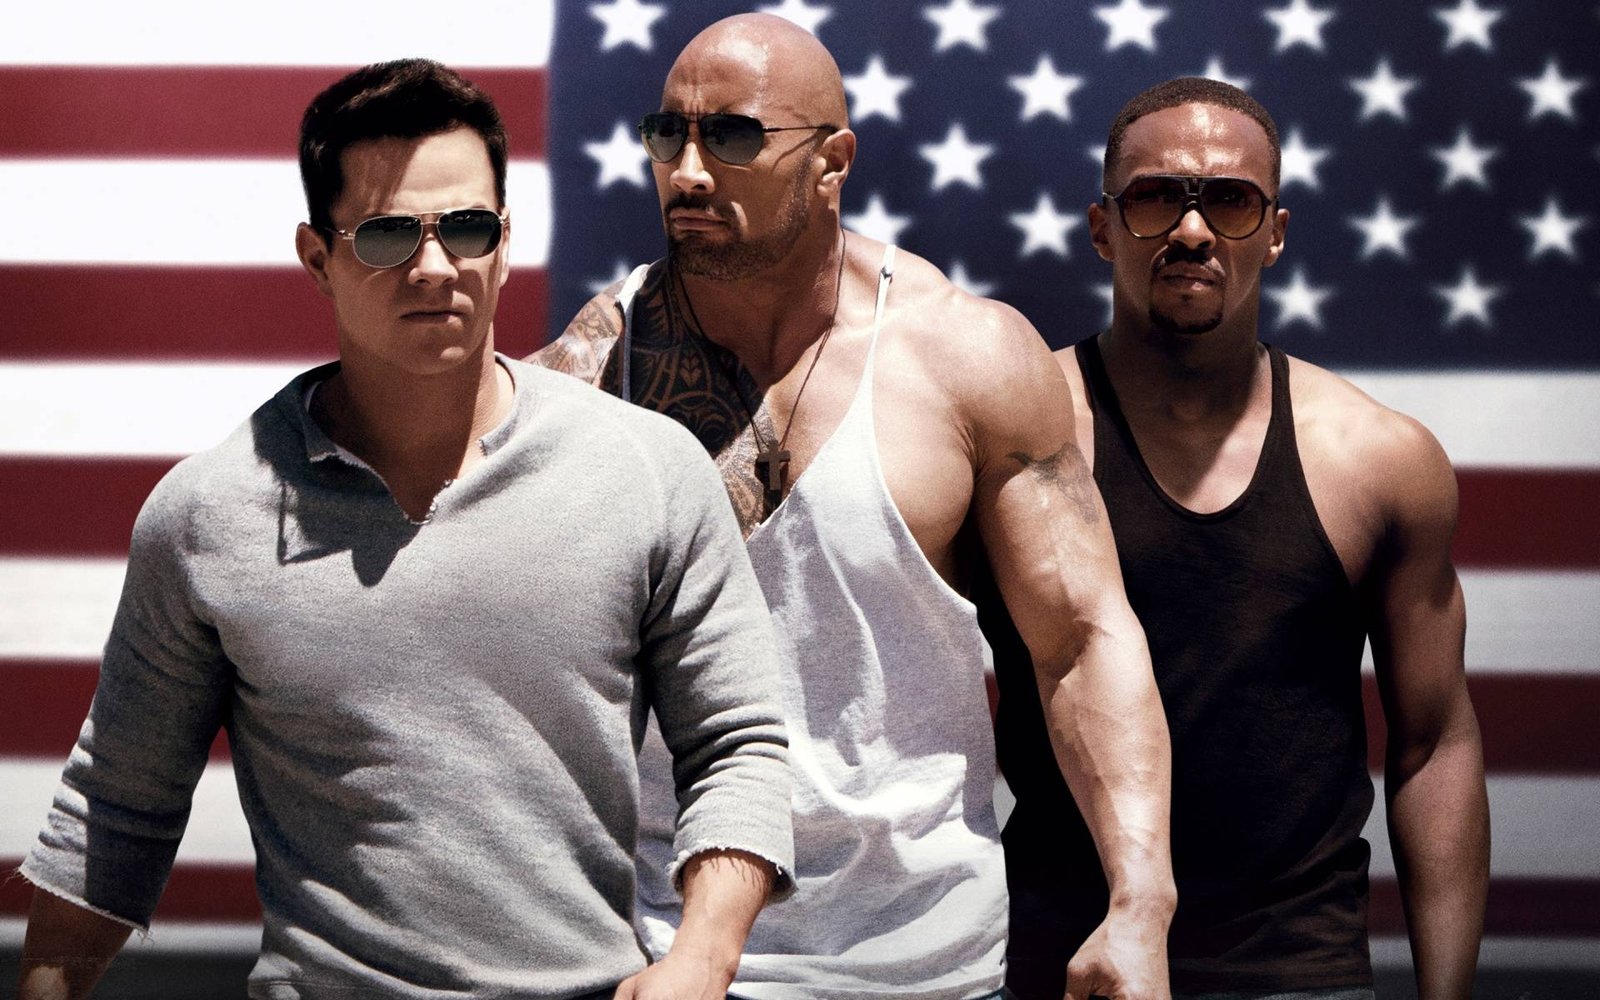 Action Movies on Hulu: Pain & Gain